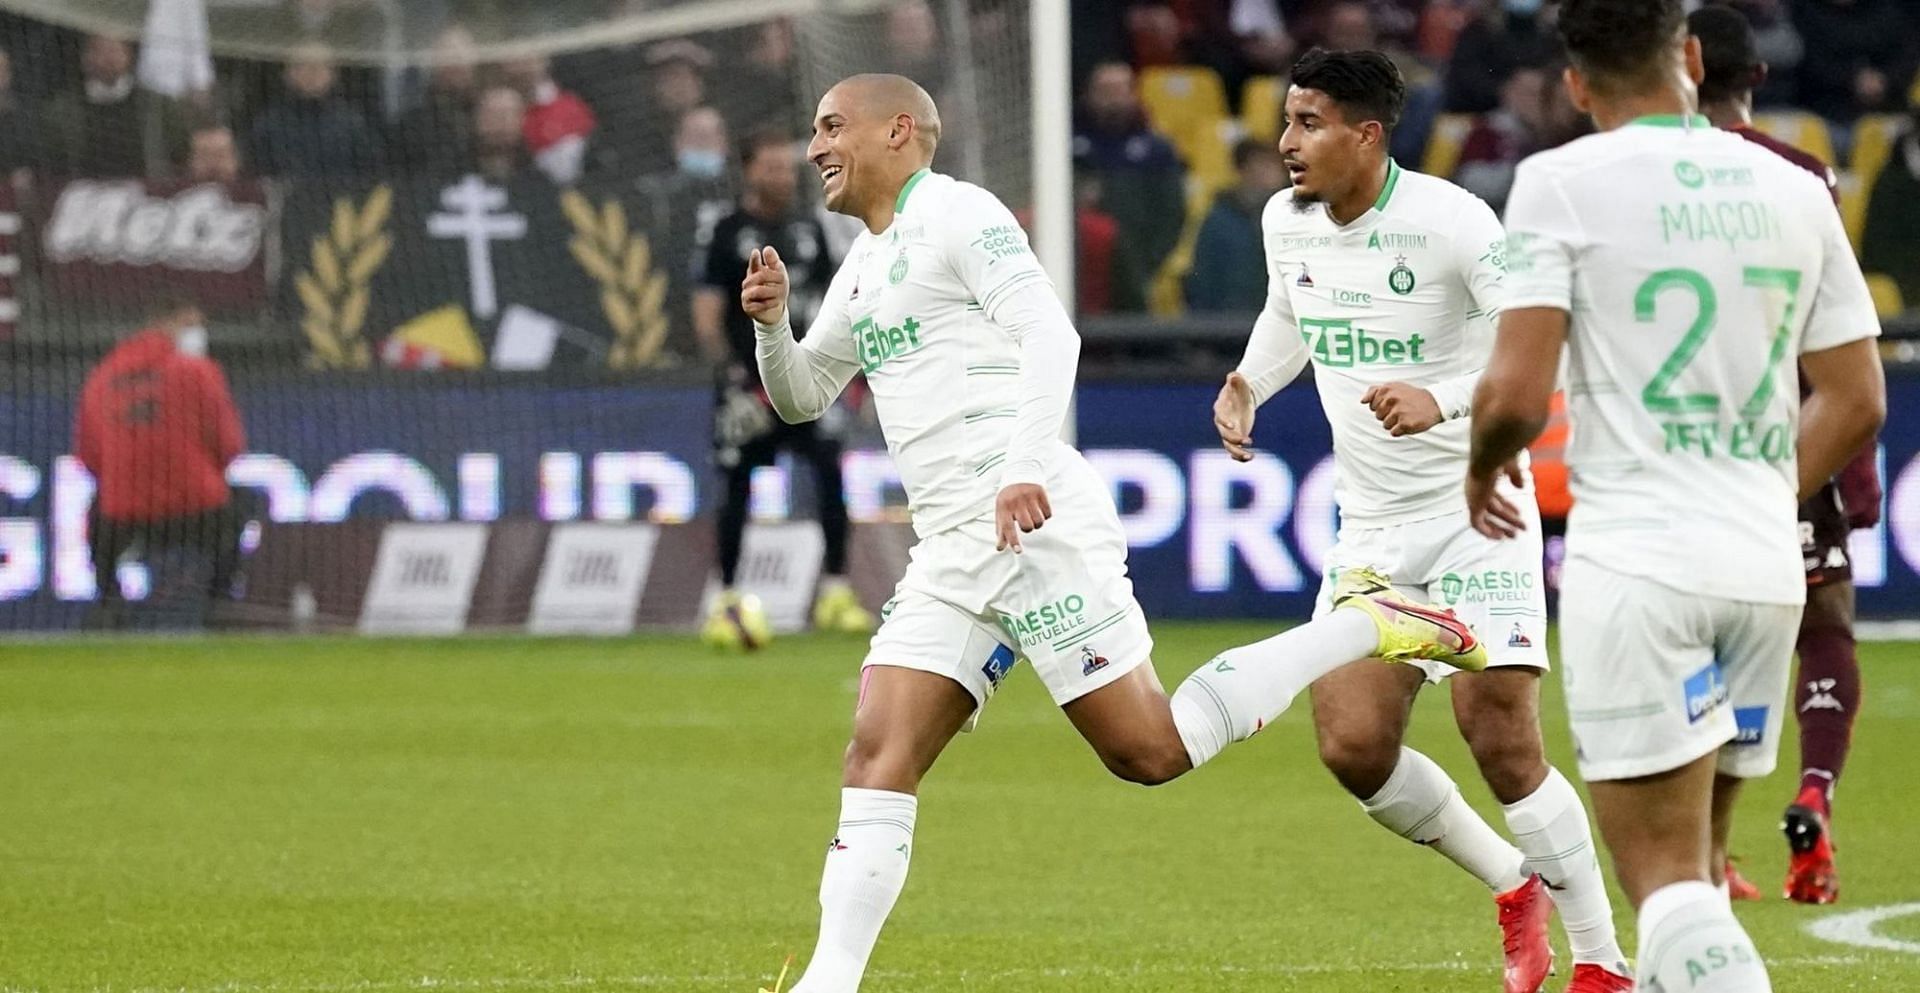 Saint Etienne travel to Angers in their Ligue 1 fixture on Wednesday